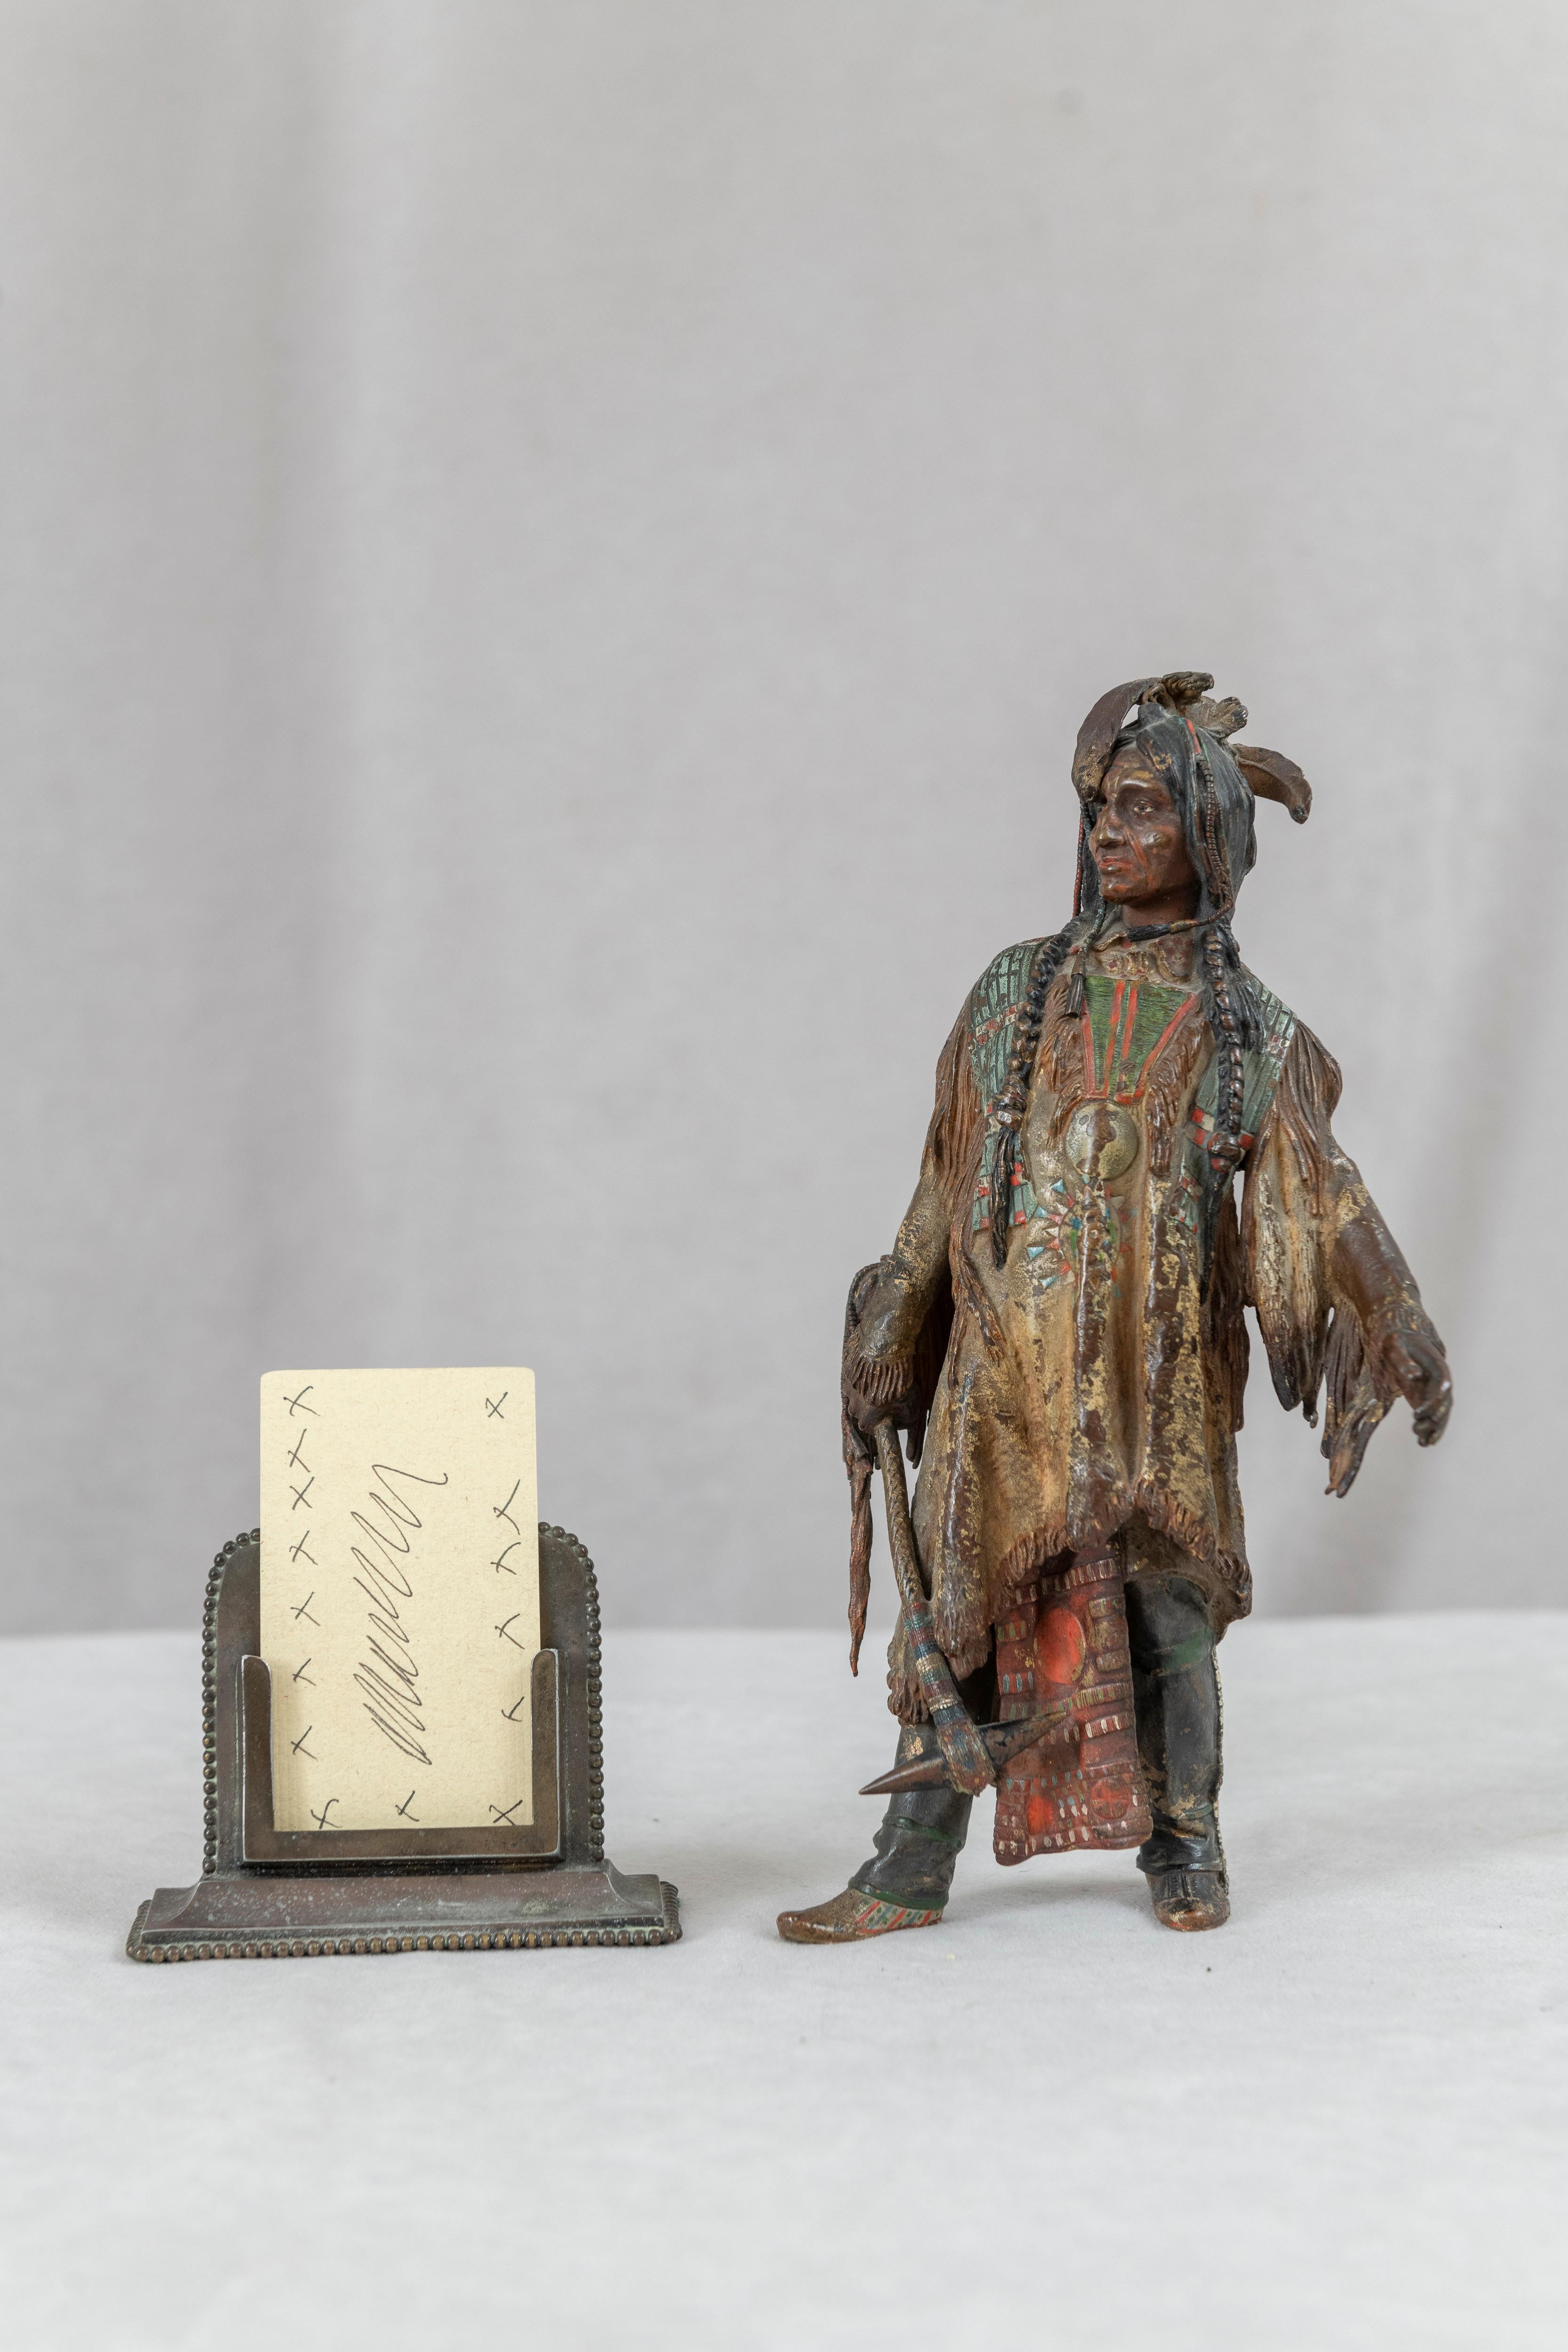   This highly detailed casting of an American Indian was done by one of the noted artists of the old American West, Carl Kauba. The figure also shows off Kauba's attention to detail with his meticulous painted highlights of the figure. While Kauba